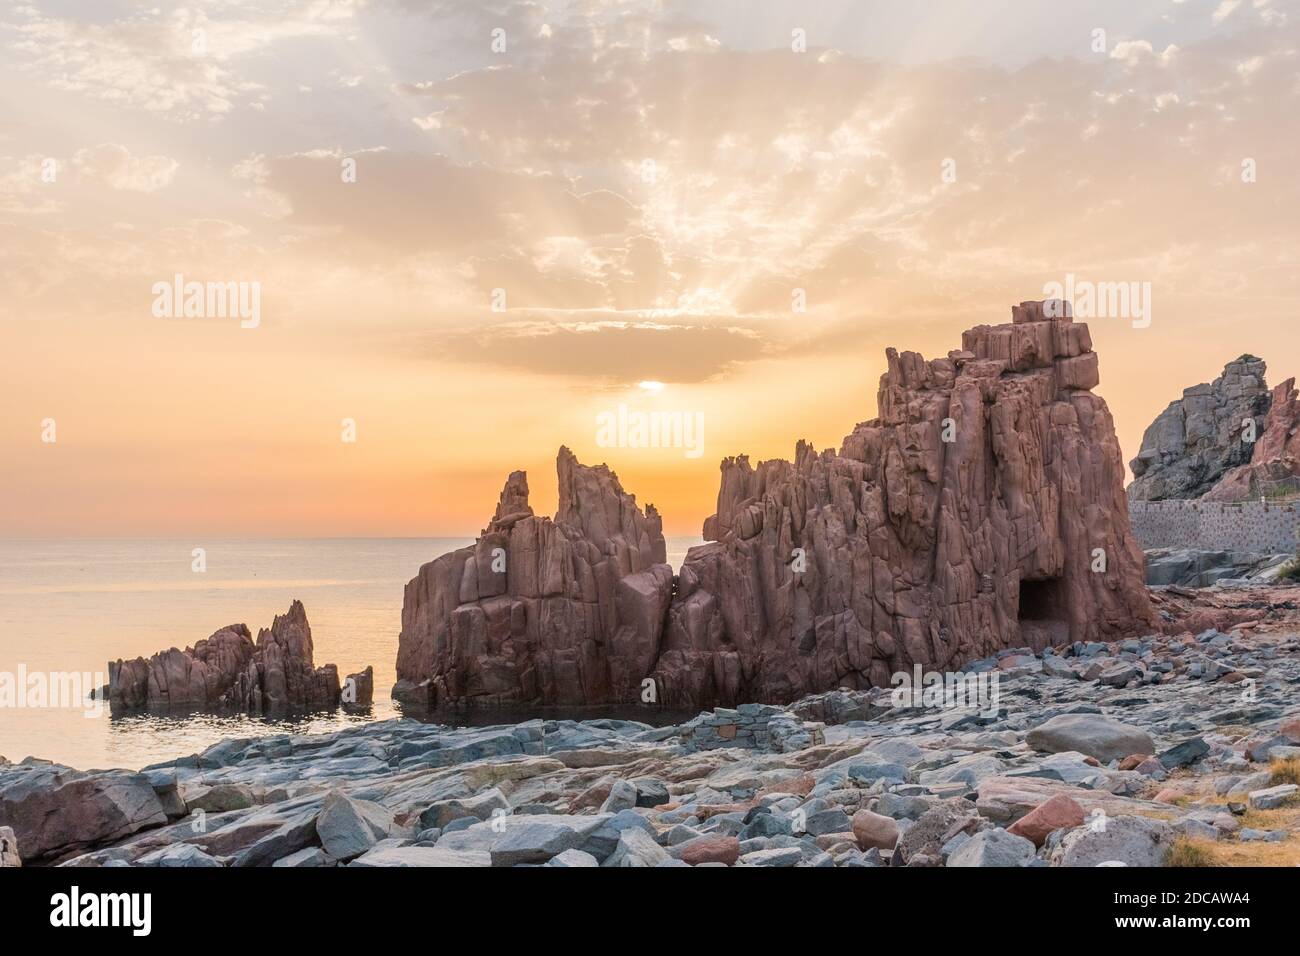 Geological feature called 'Rocce rosse' (red rocks) along the coastline in Arbatax (Sardinia, Italy) at the sunrise Stock Photo